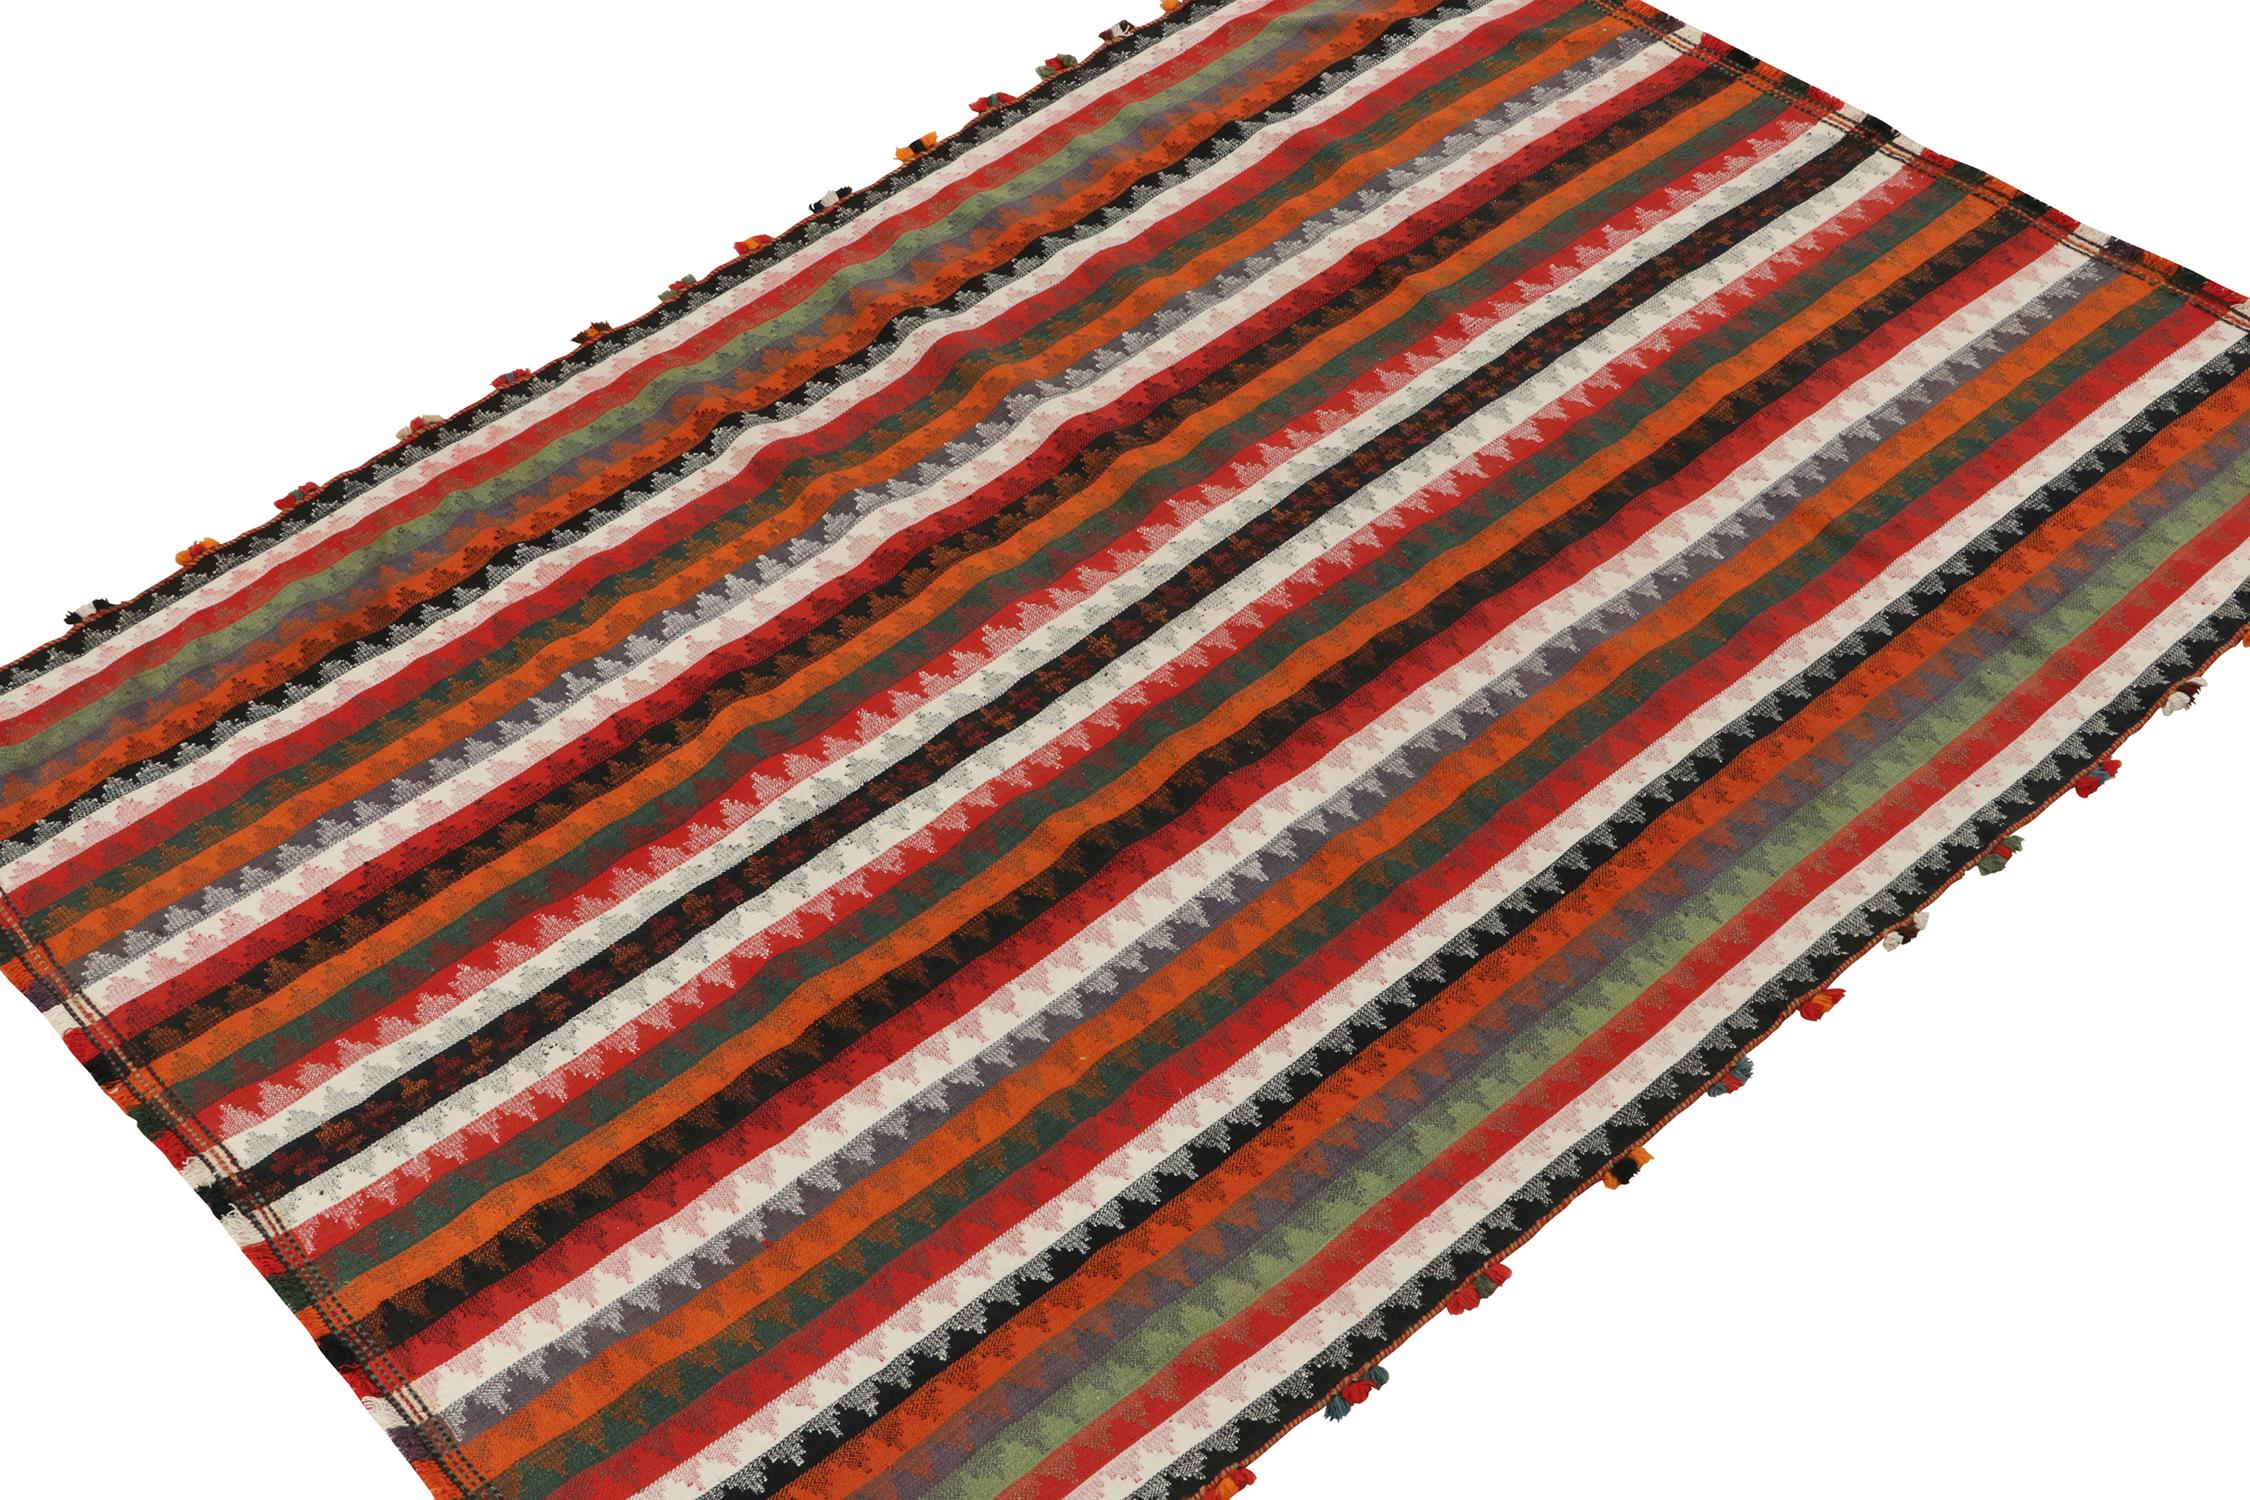 This vintage 6x8 Persian Kilim is a Shiraz rug, and an exemplar of this tribal provenance. Handwoven in wool, it originates circa 1950-1960.

Further On the Design: 

This Shiraz Kilim enjoys polychromatic stripes and subdued geometric patterns